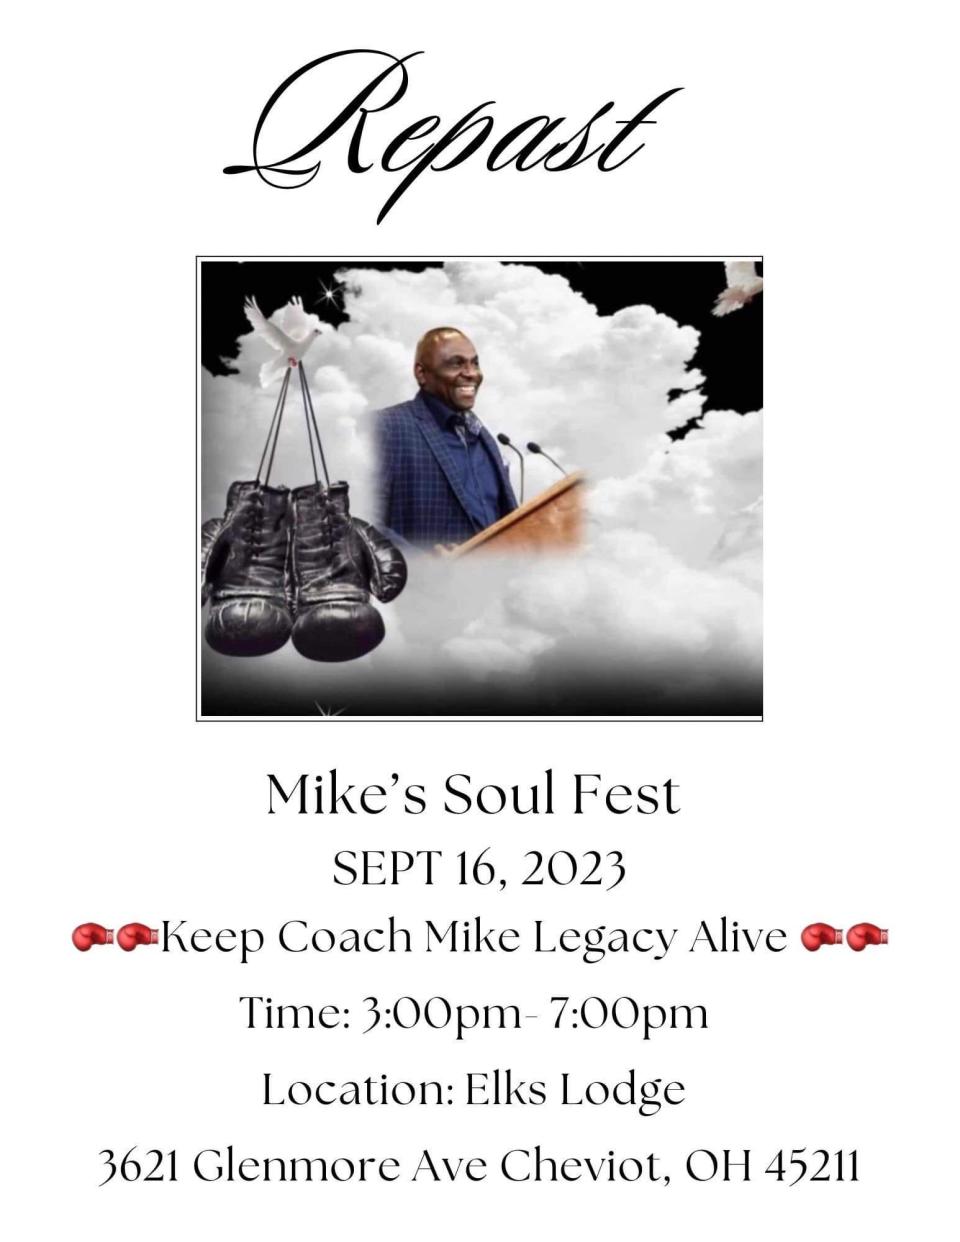 Mike's Soul Fest, a public memorial honoring Mike, is scheduled for Saturday, Sept. 16, at 3 p.m.